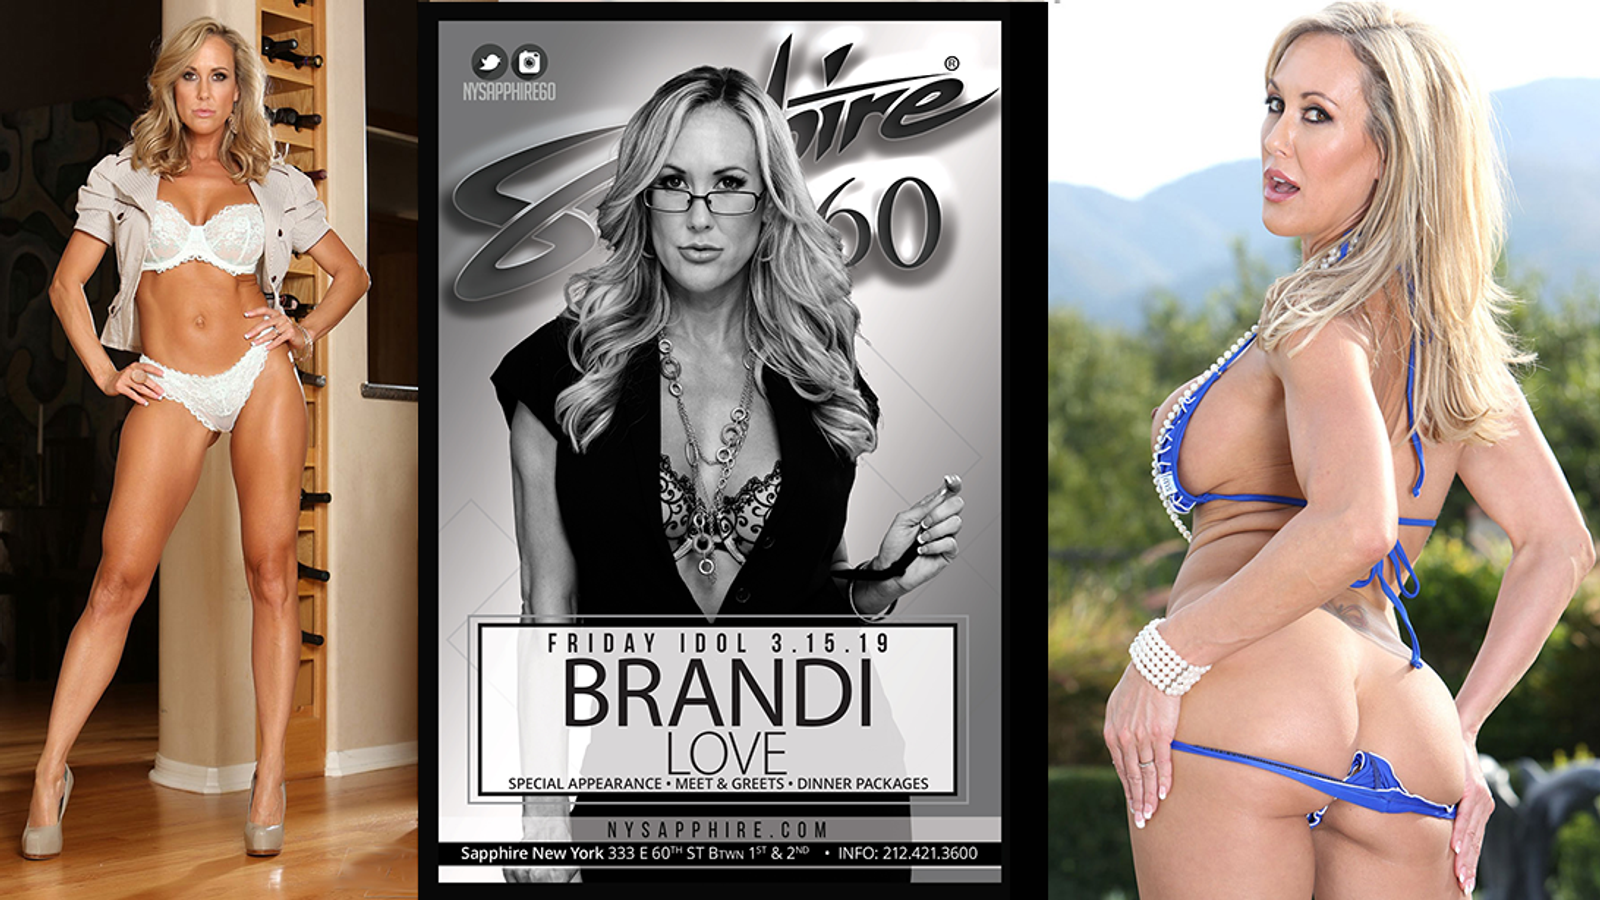 Brandi Love Will Be Live at Sapphire 60 in NYC Friday Night